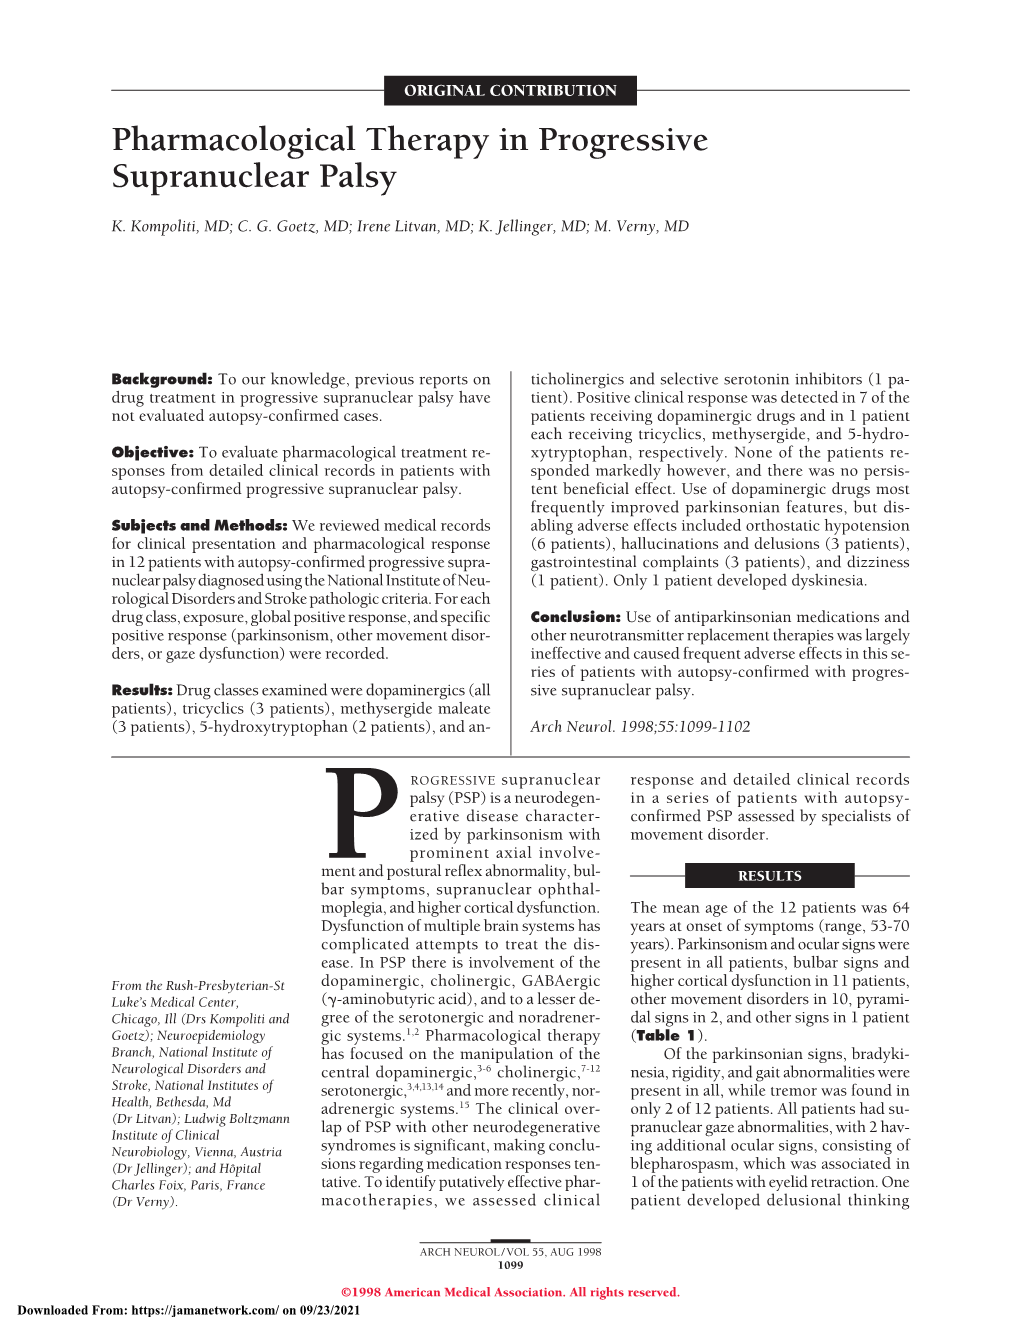 Pharmacological Therapy in Progressive Supranuclear Palsy